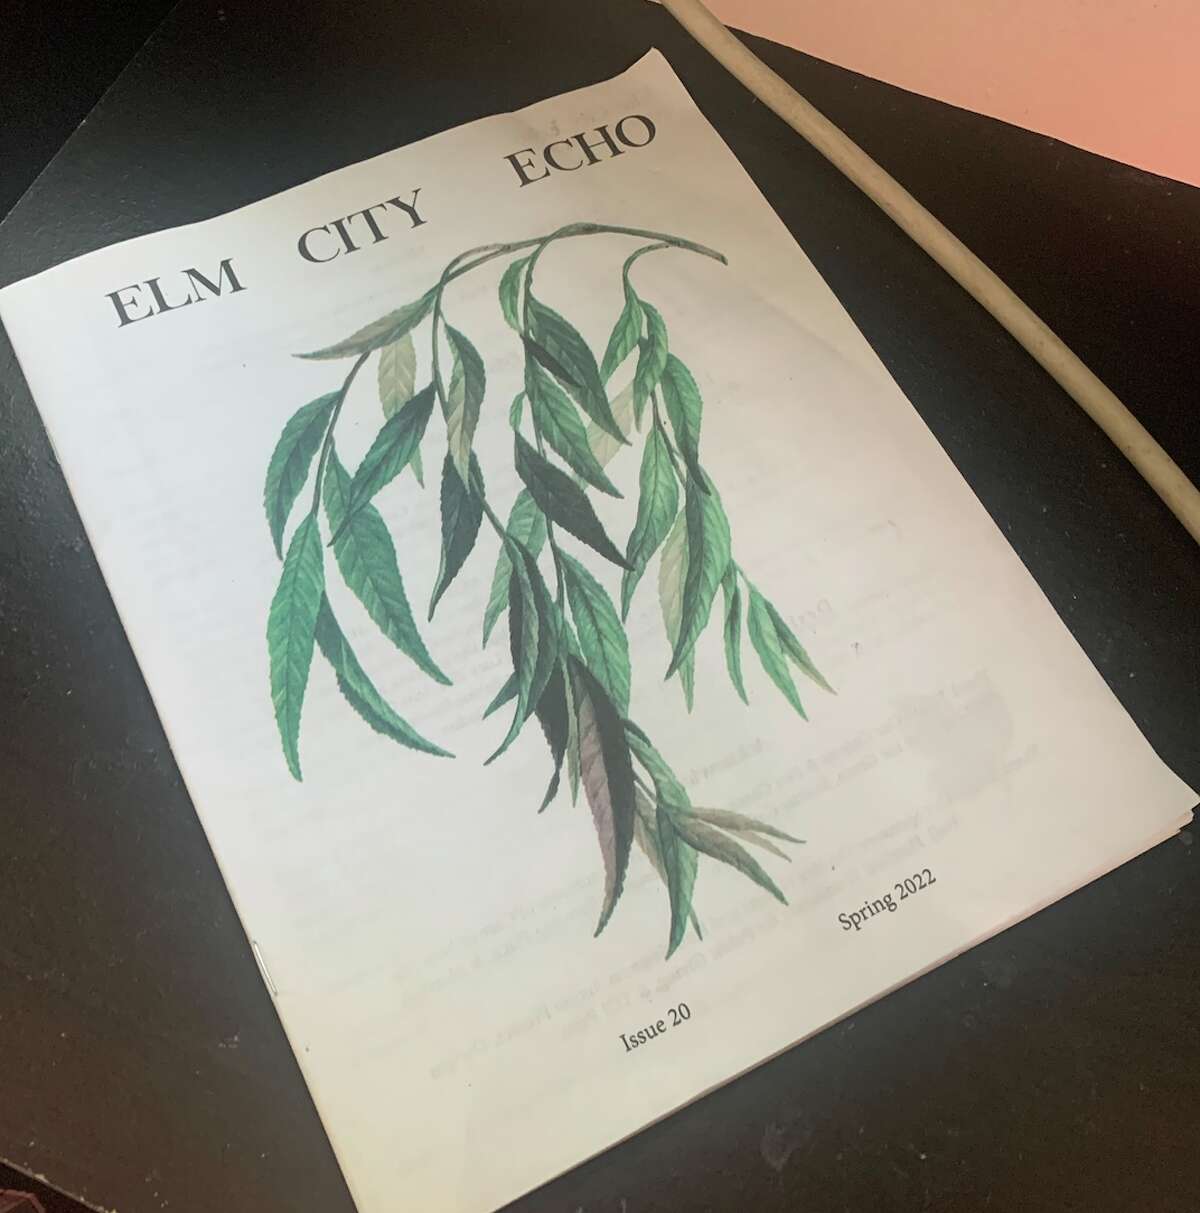 The 20th edition of Elm City Echo.